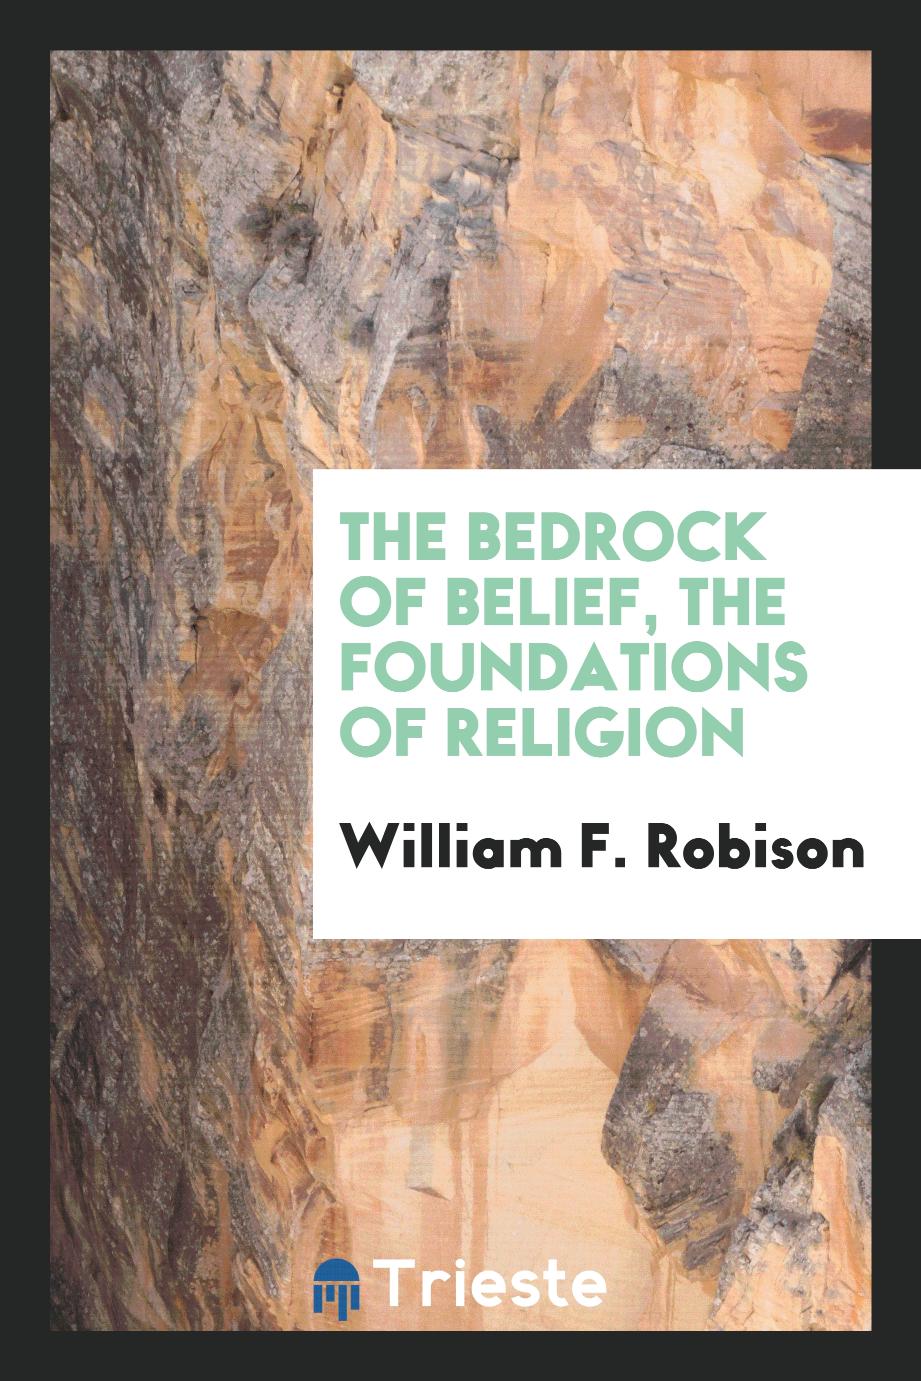 The bedrock of belief, the foundations of religion